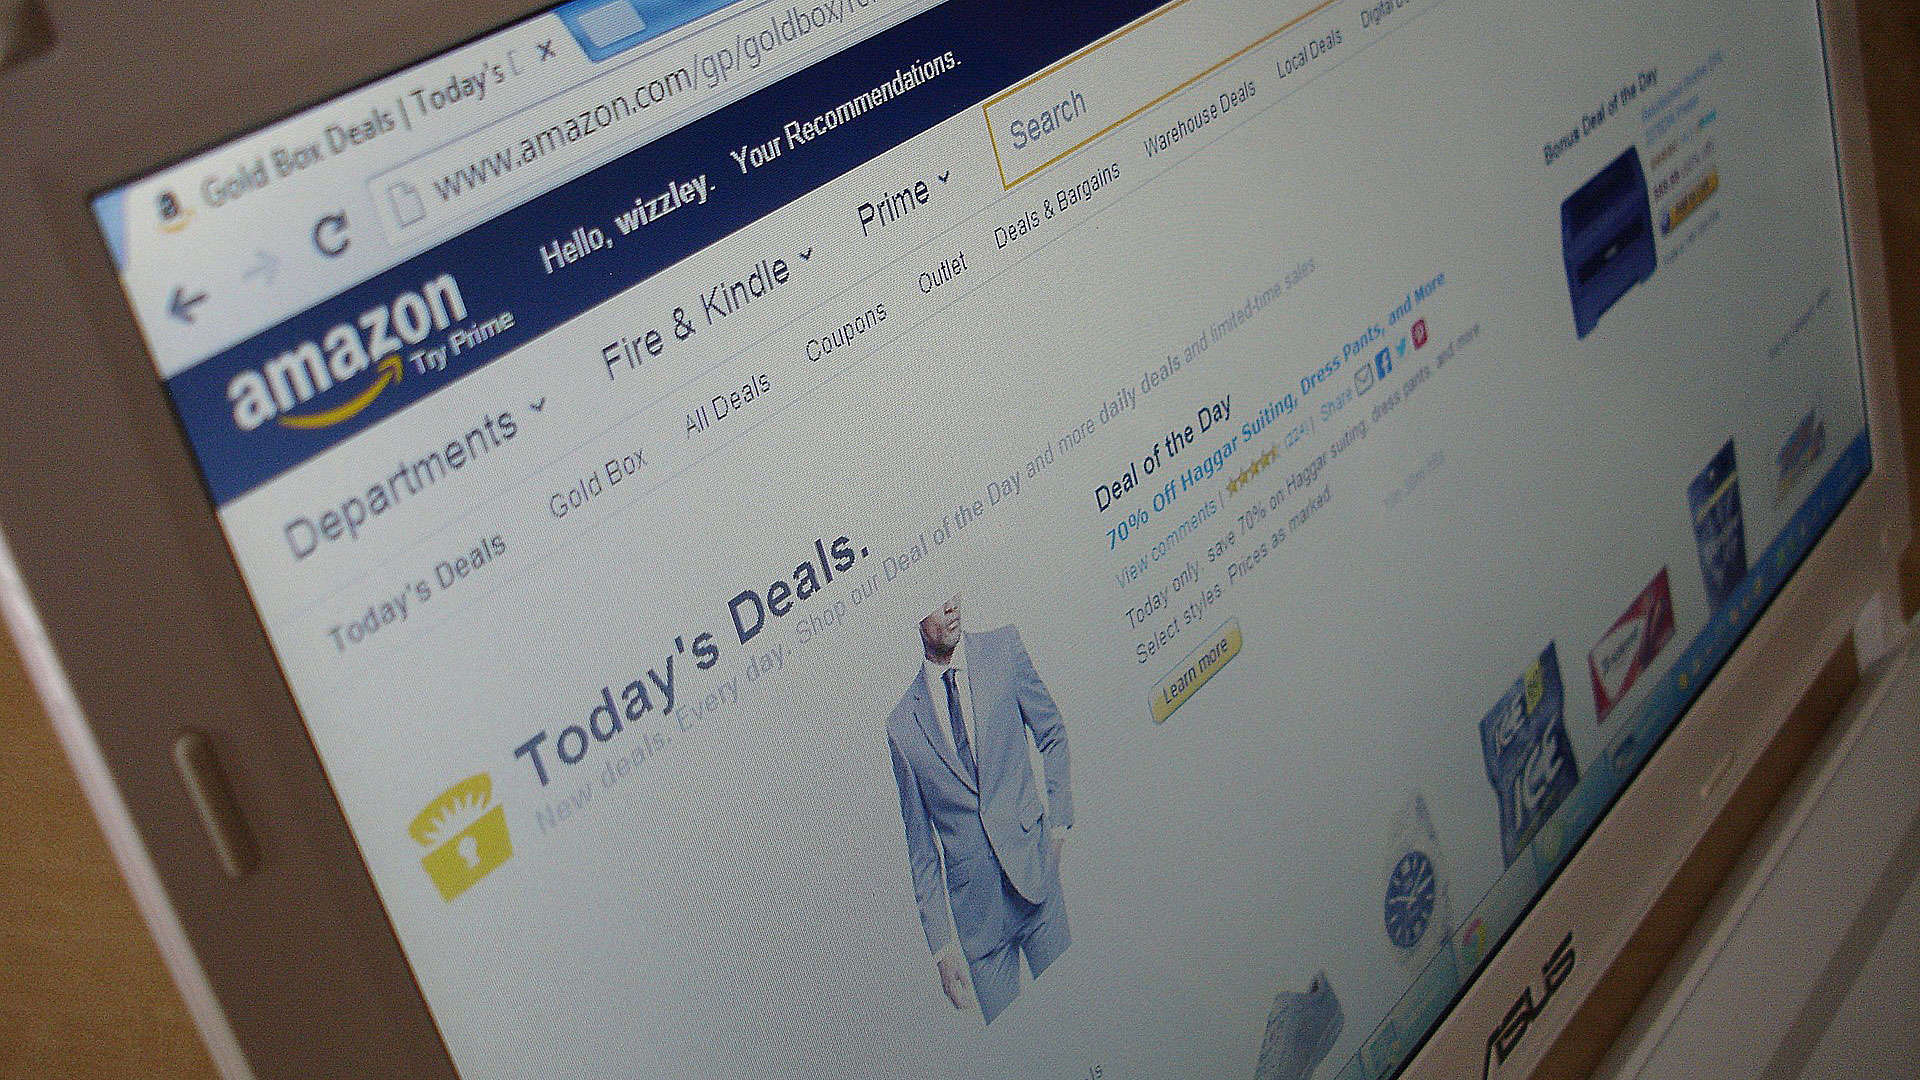 An image of a laptop's web browser shopping on Amazon and viewing high-converting Amazon product descriptions on the screen.